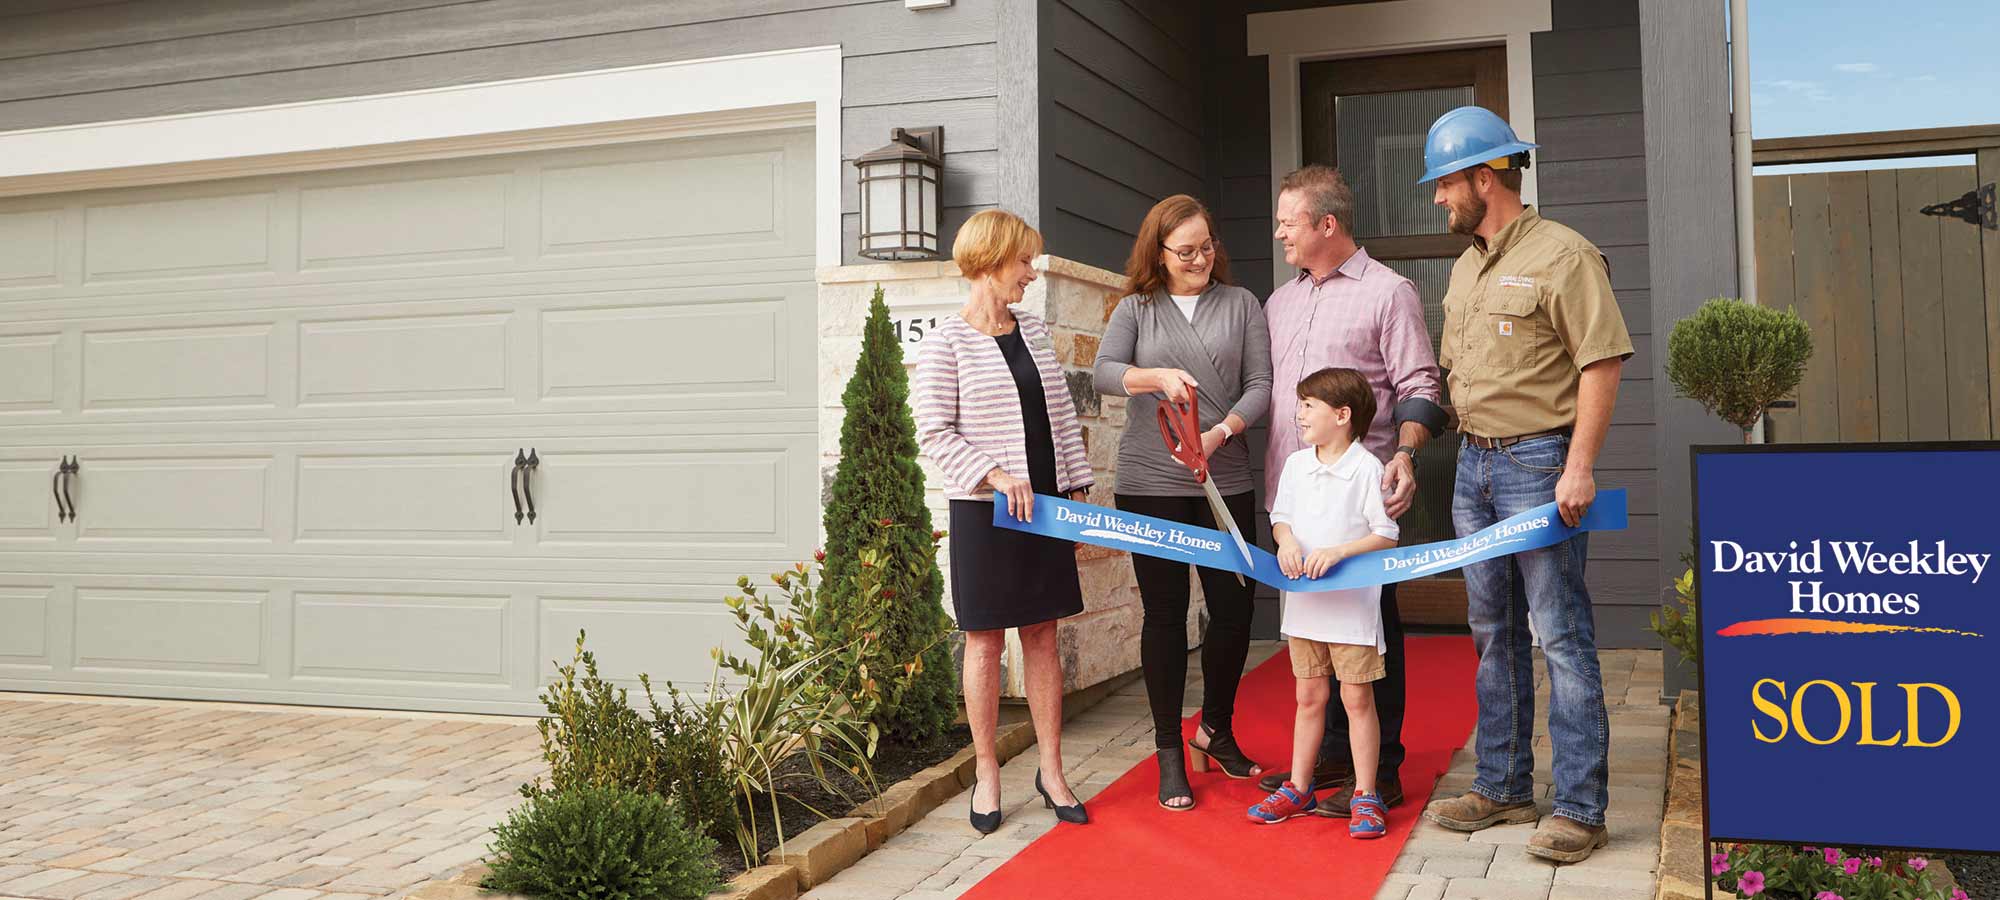 A David Weekley Homes Sales Consultant and Builder welcoming a family to their new home